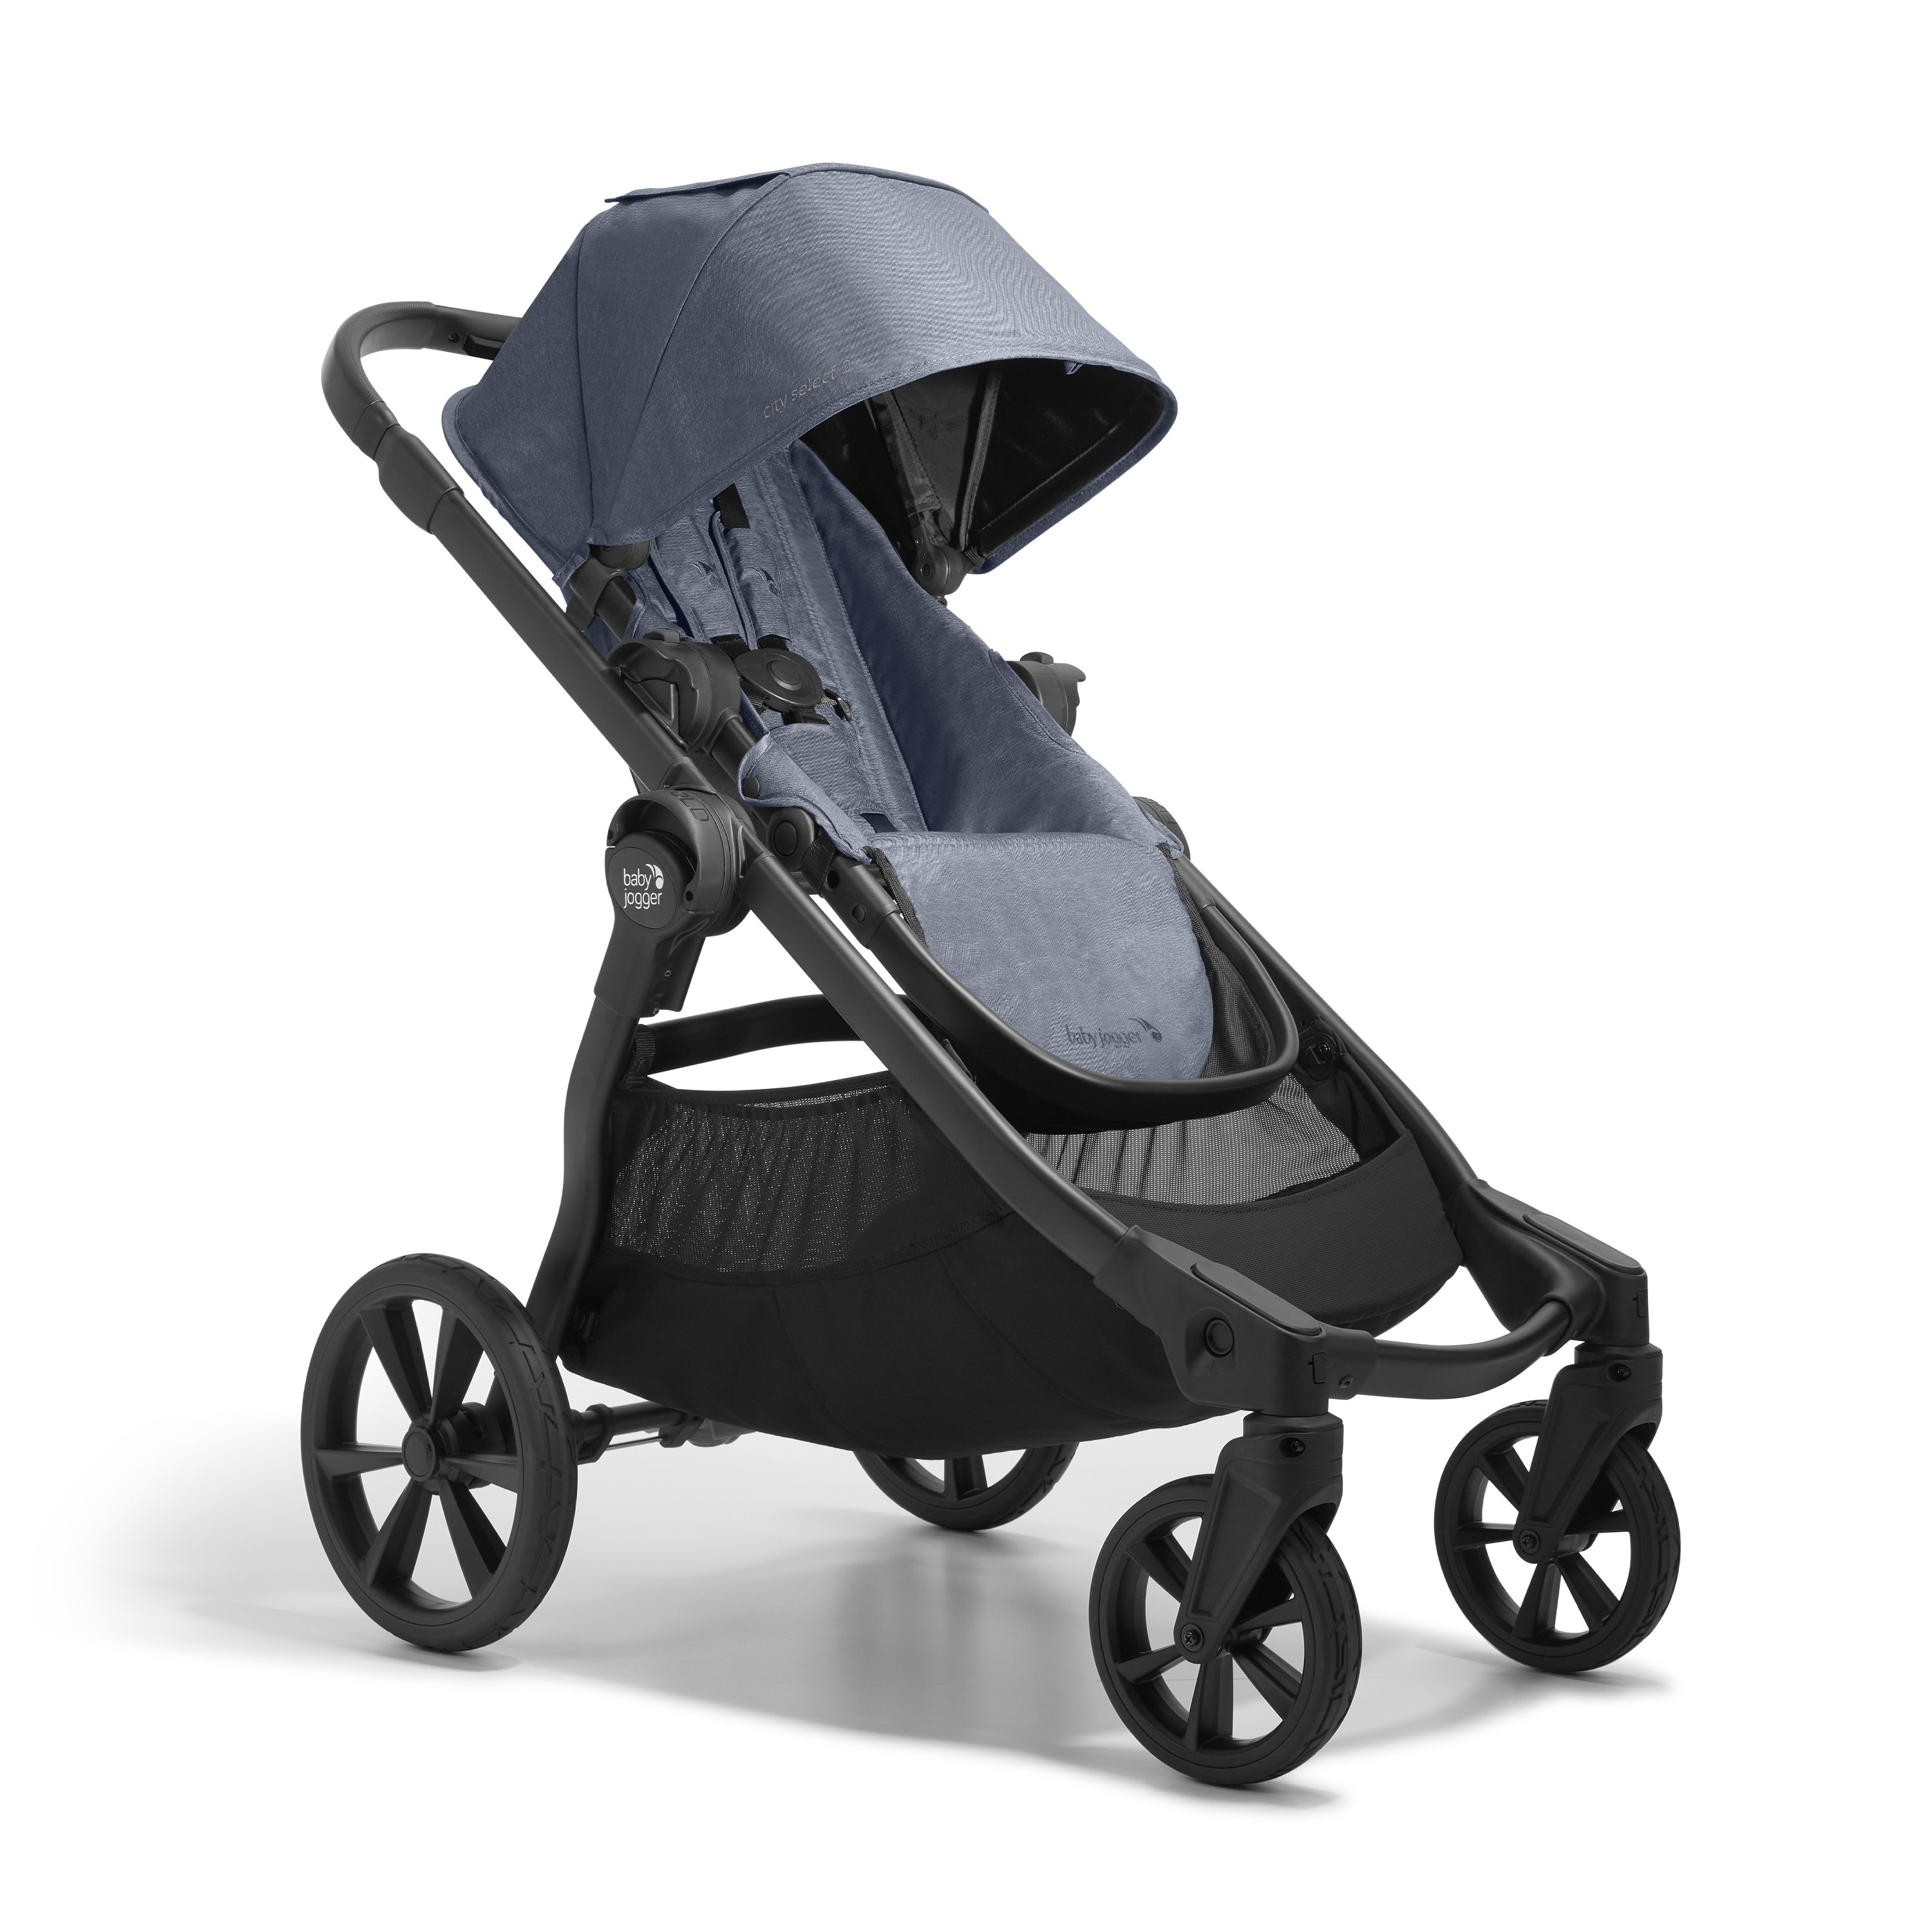 Baby Jogger city select® 2 stroller | Baby Jogger